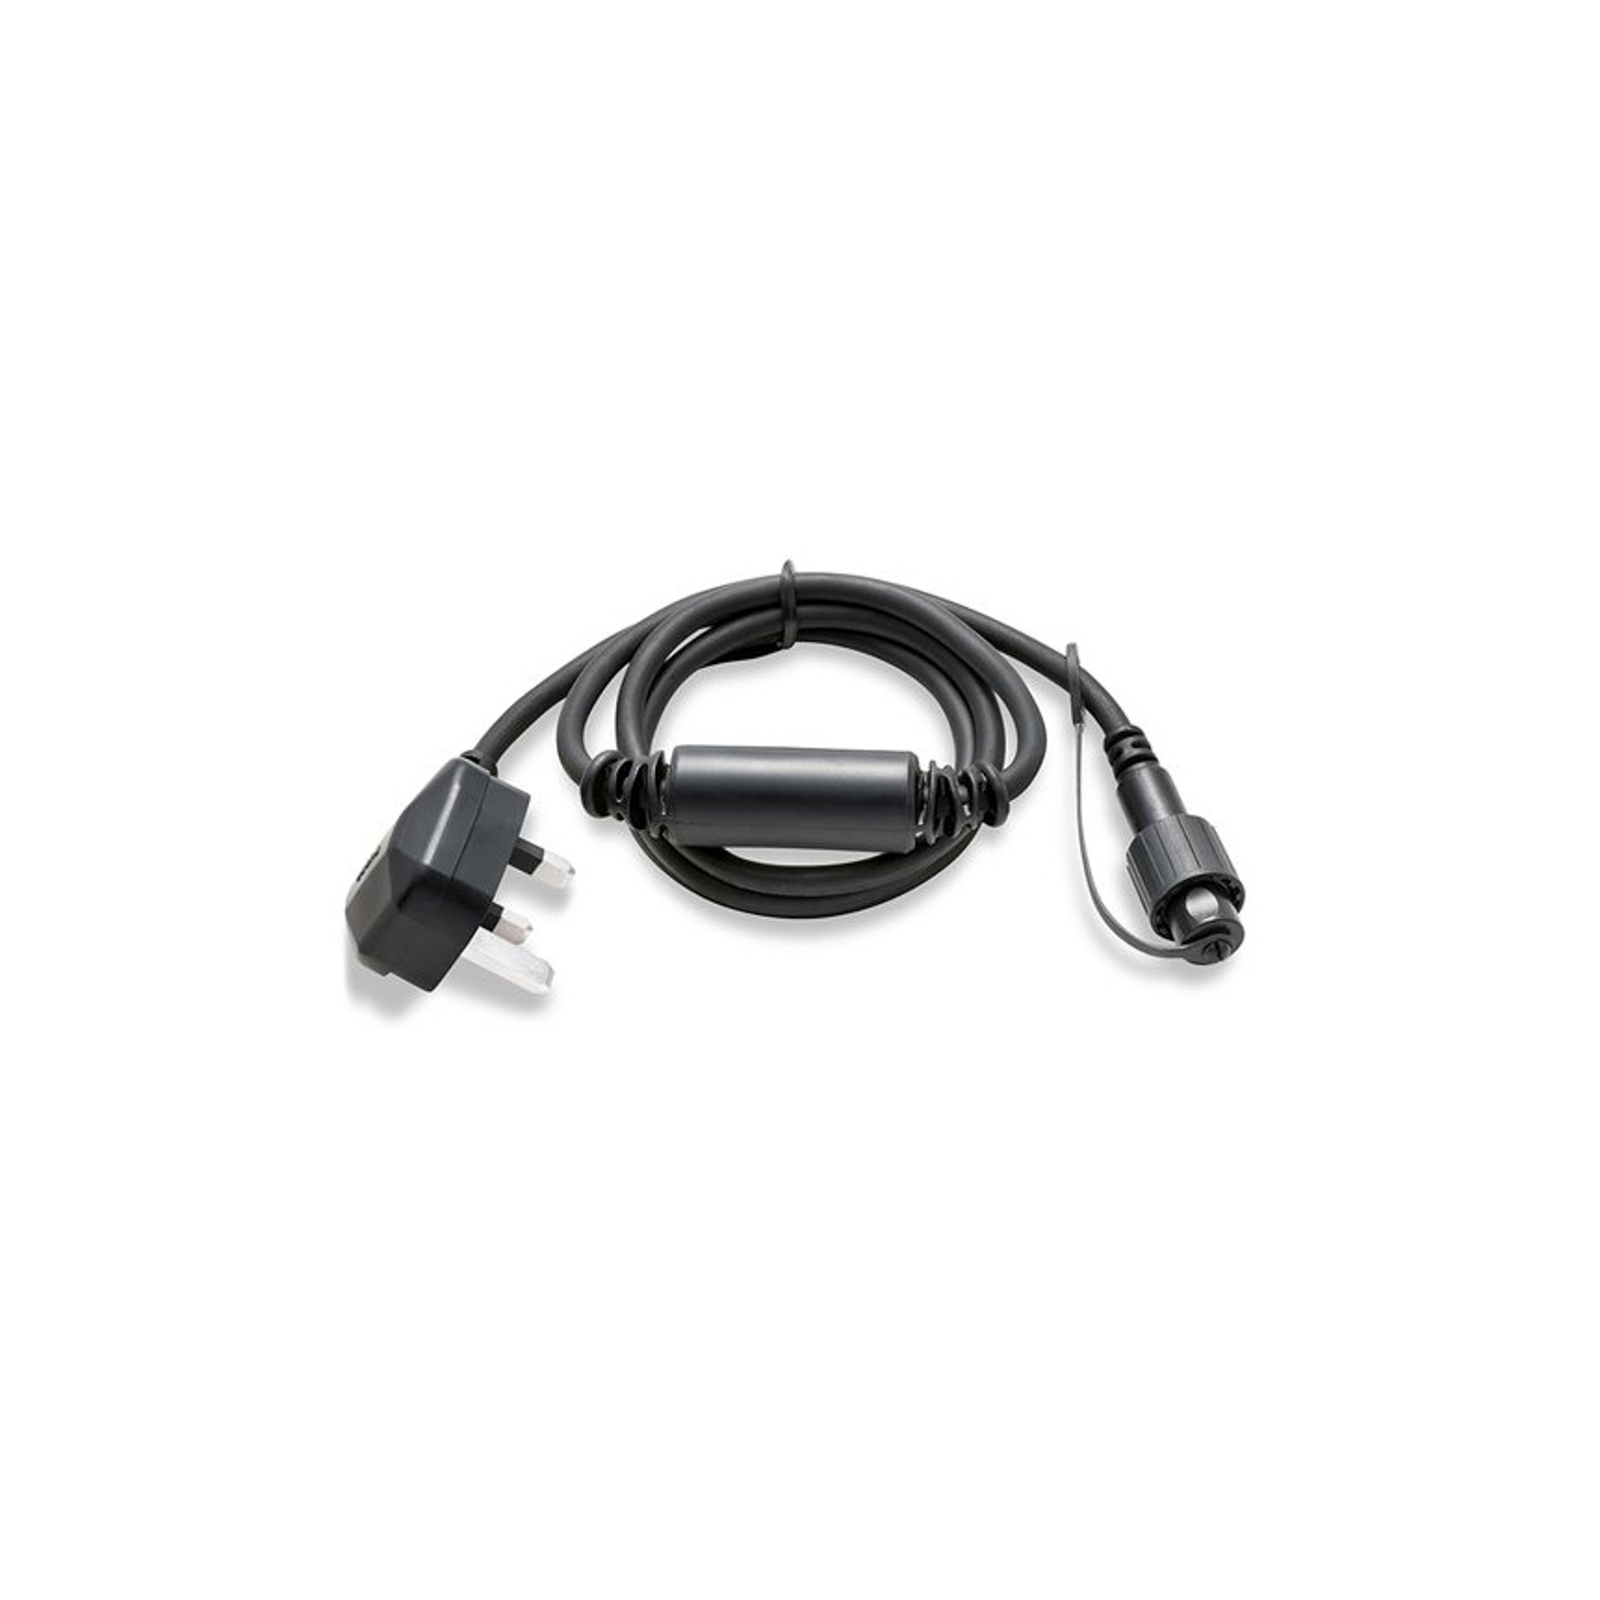 Chrissline starter cable 1.5 m with a UK plug